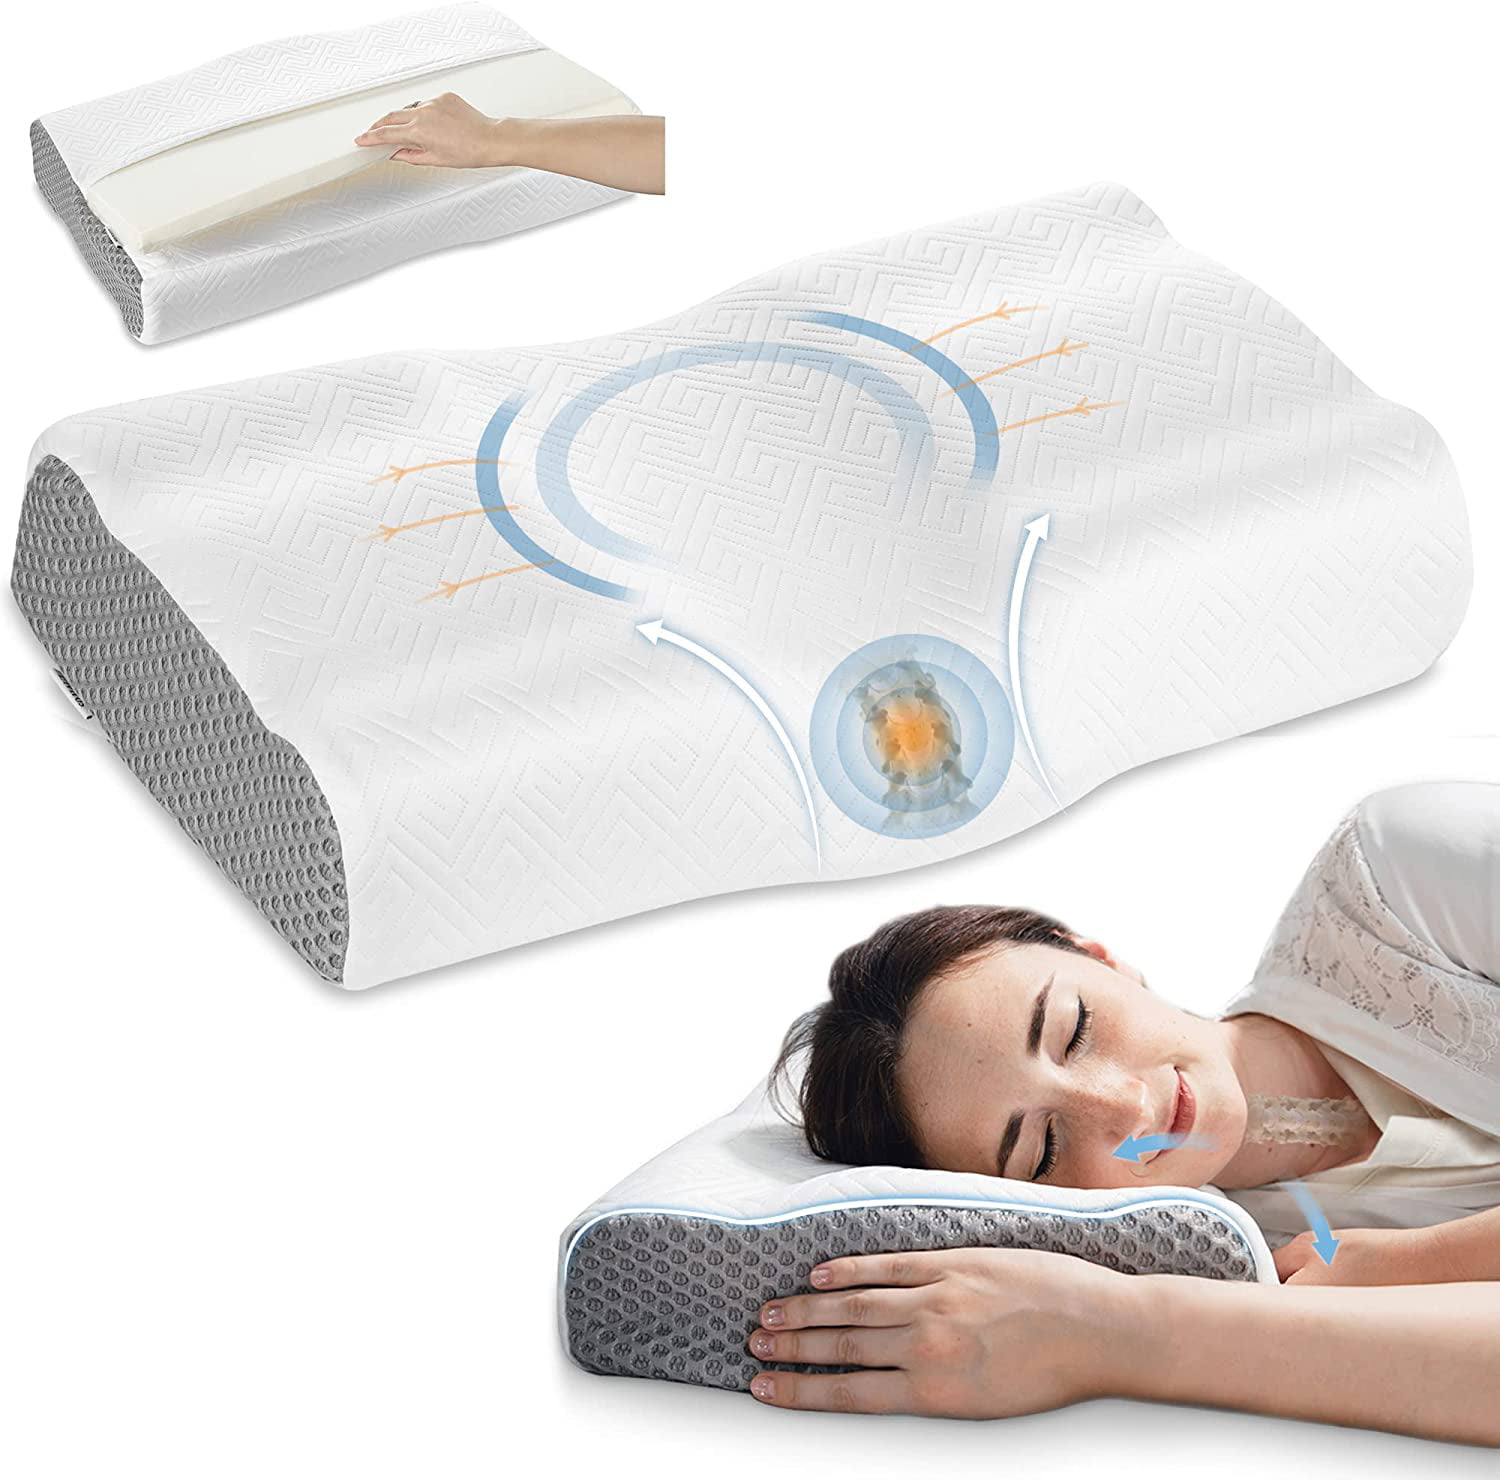 Memory Foam Sleep Pillow Contour Cervical Orthopedic Neck Support Breath Pillows 